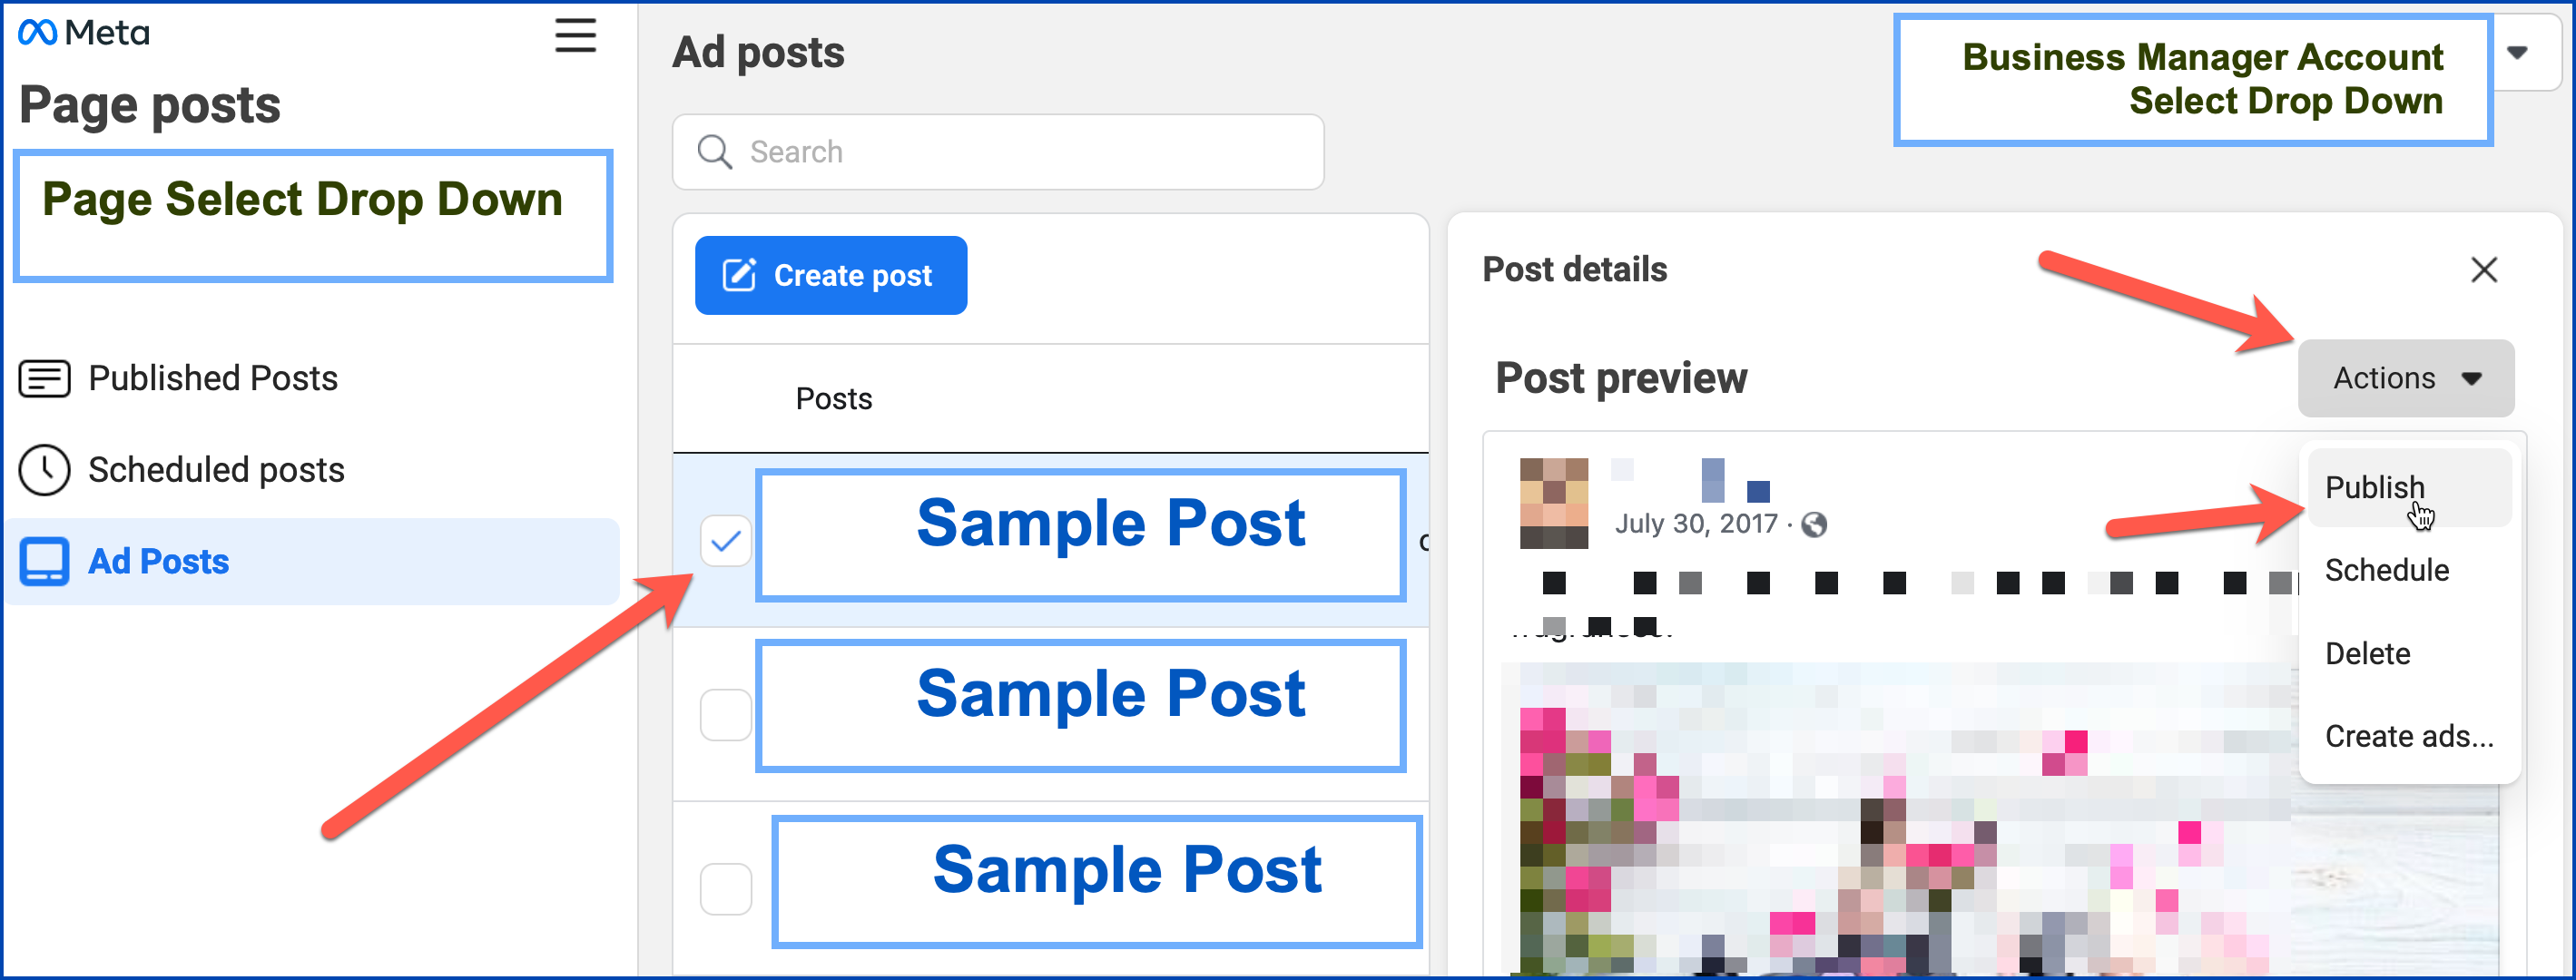 Image shows the Ads Post selector, with a single ad post selected. Image shows an Actions drop down on the right after selecting a single post - with the option to Publish listed under the Actions drop down. 